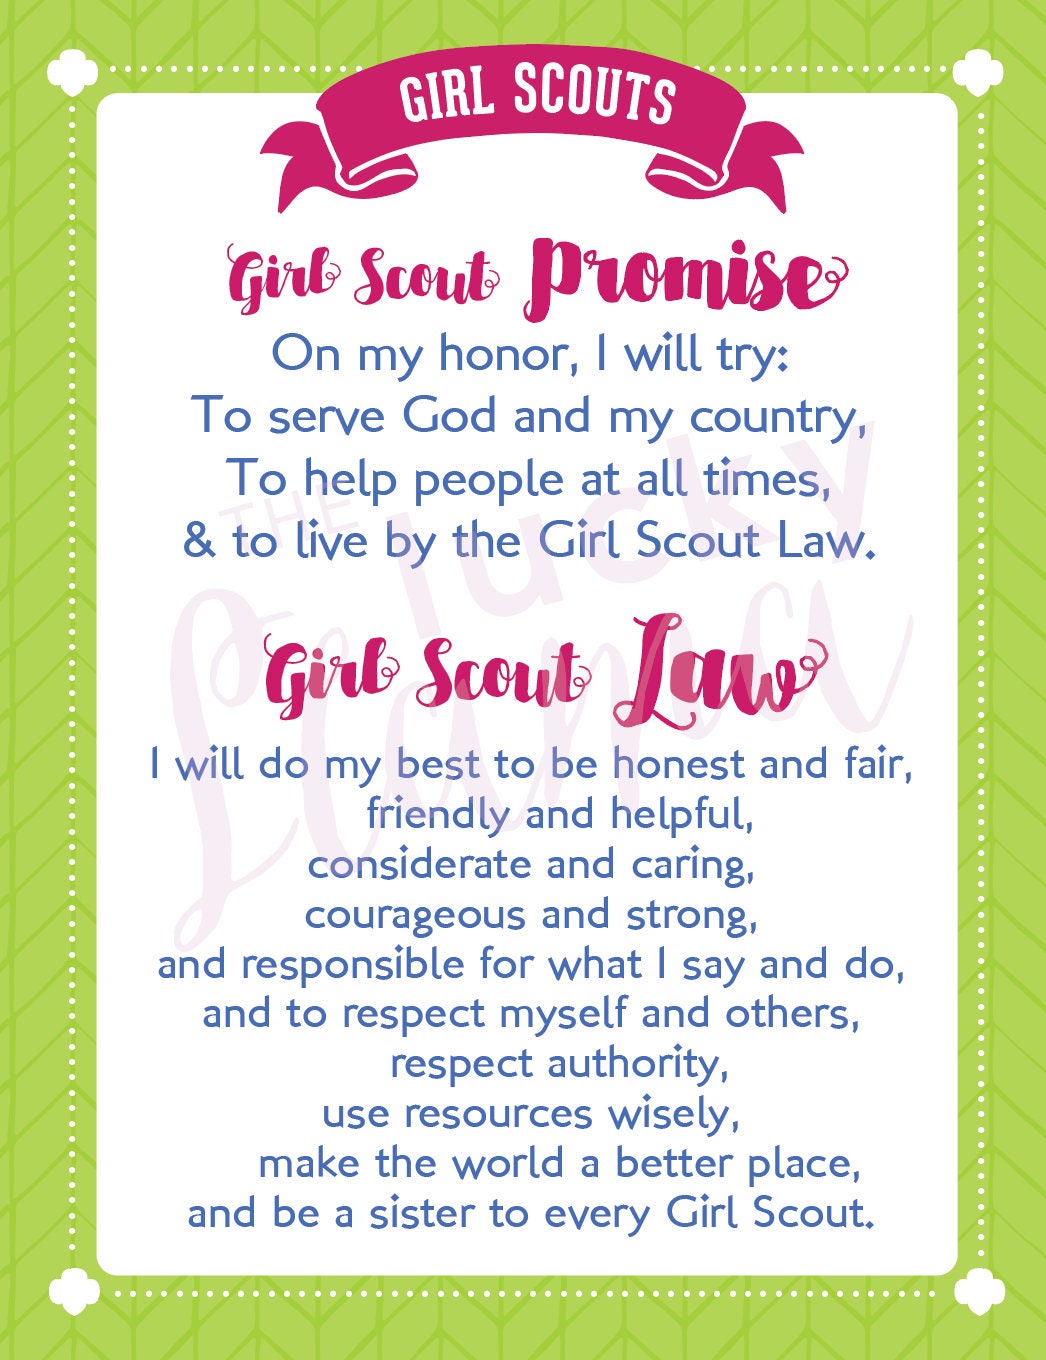 girl-scout-promise-and-law-printable-daisy-petals-handout-etsy-girl